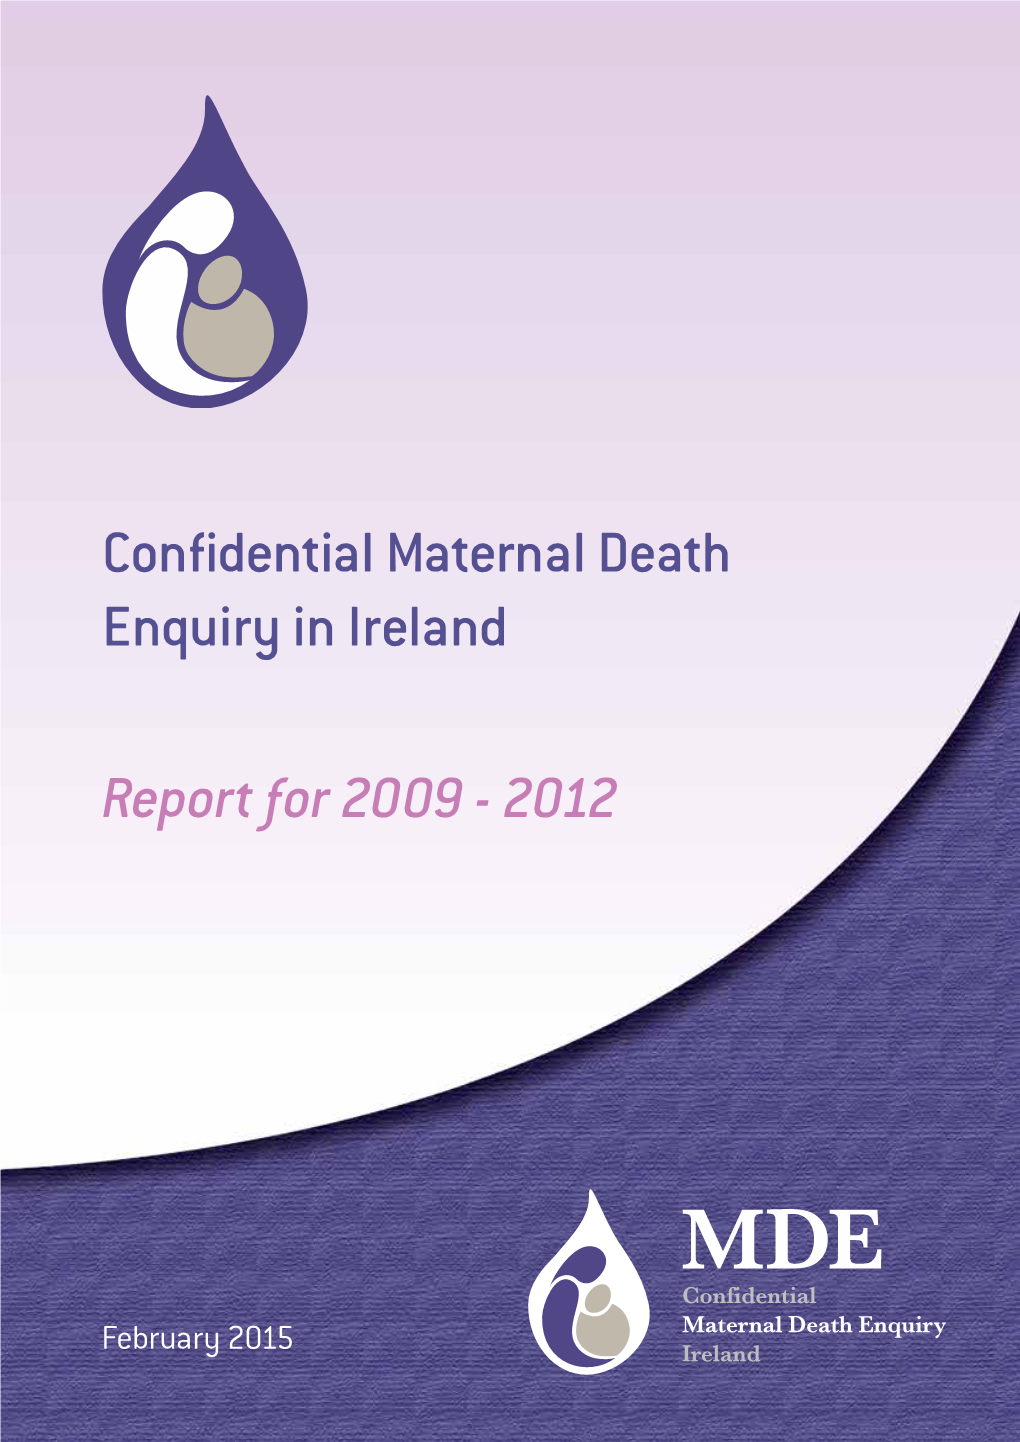 Confidential Maternal Death Enquiry in Ireland Report for 2009